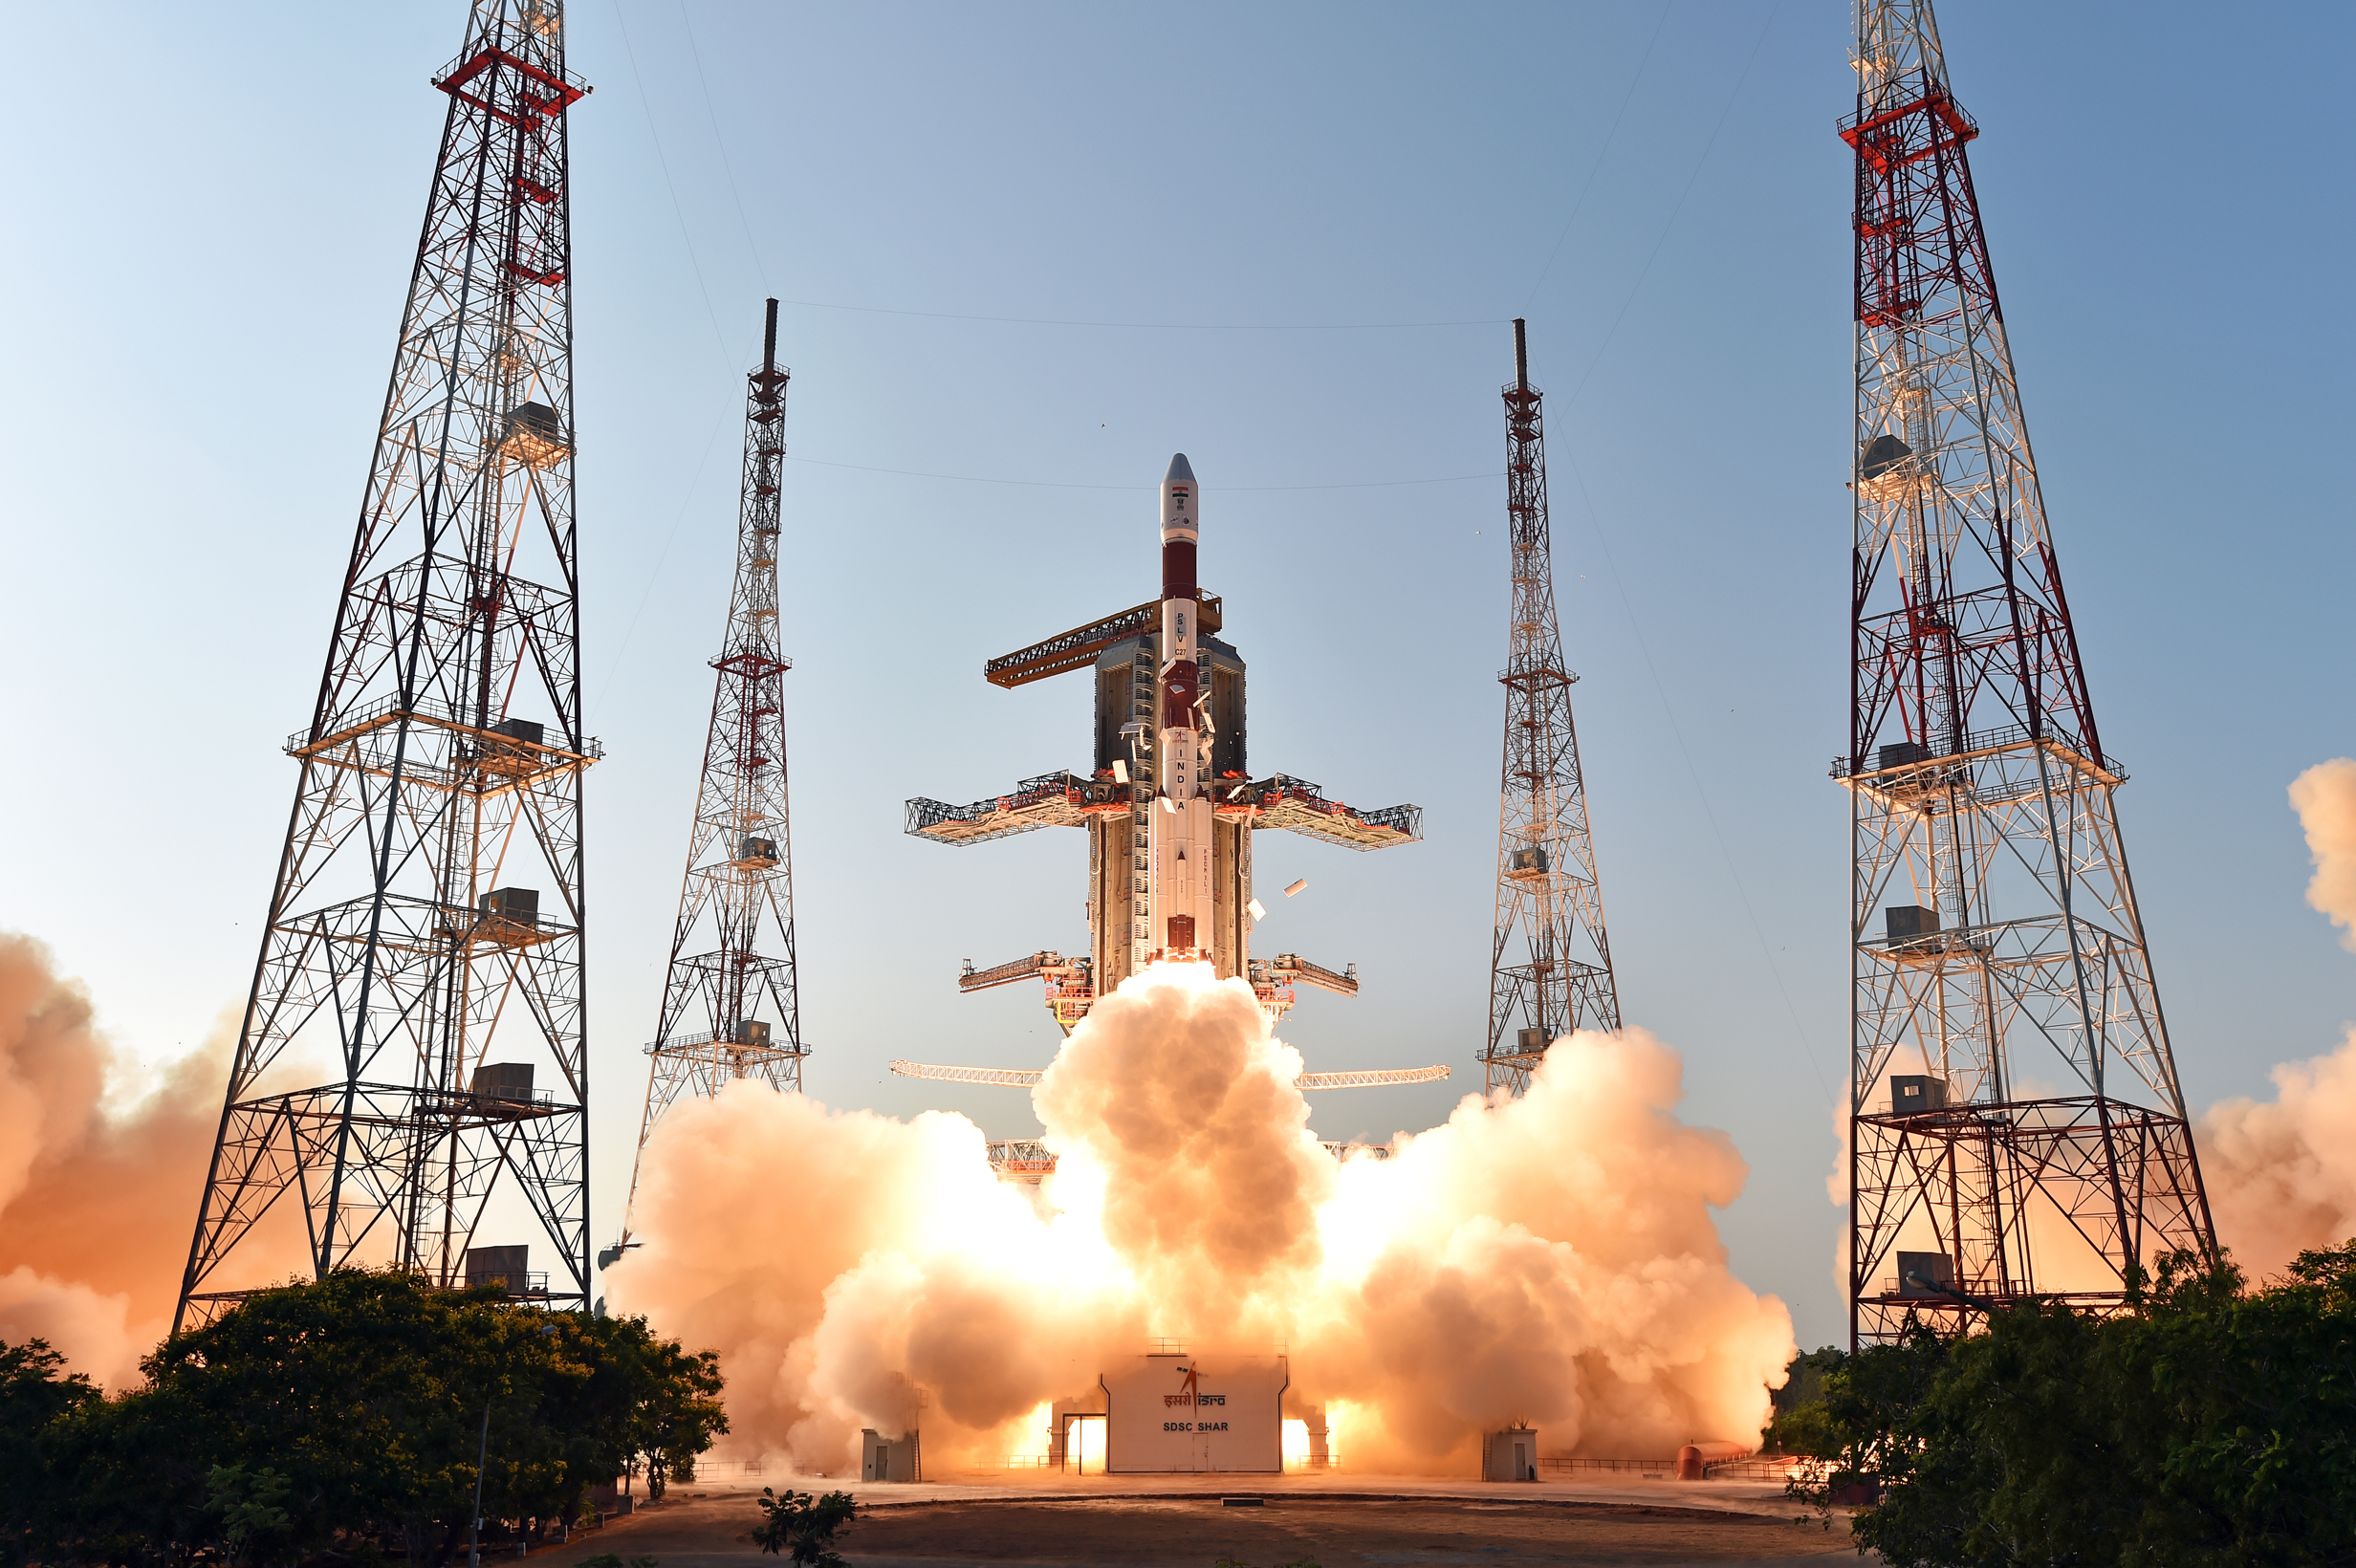 Moonstruck – ISRO’s Vision to Grace the Moon with Indian Astronauts by 2040